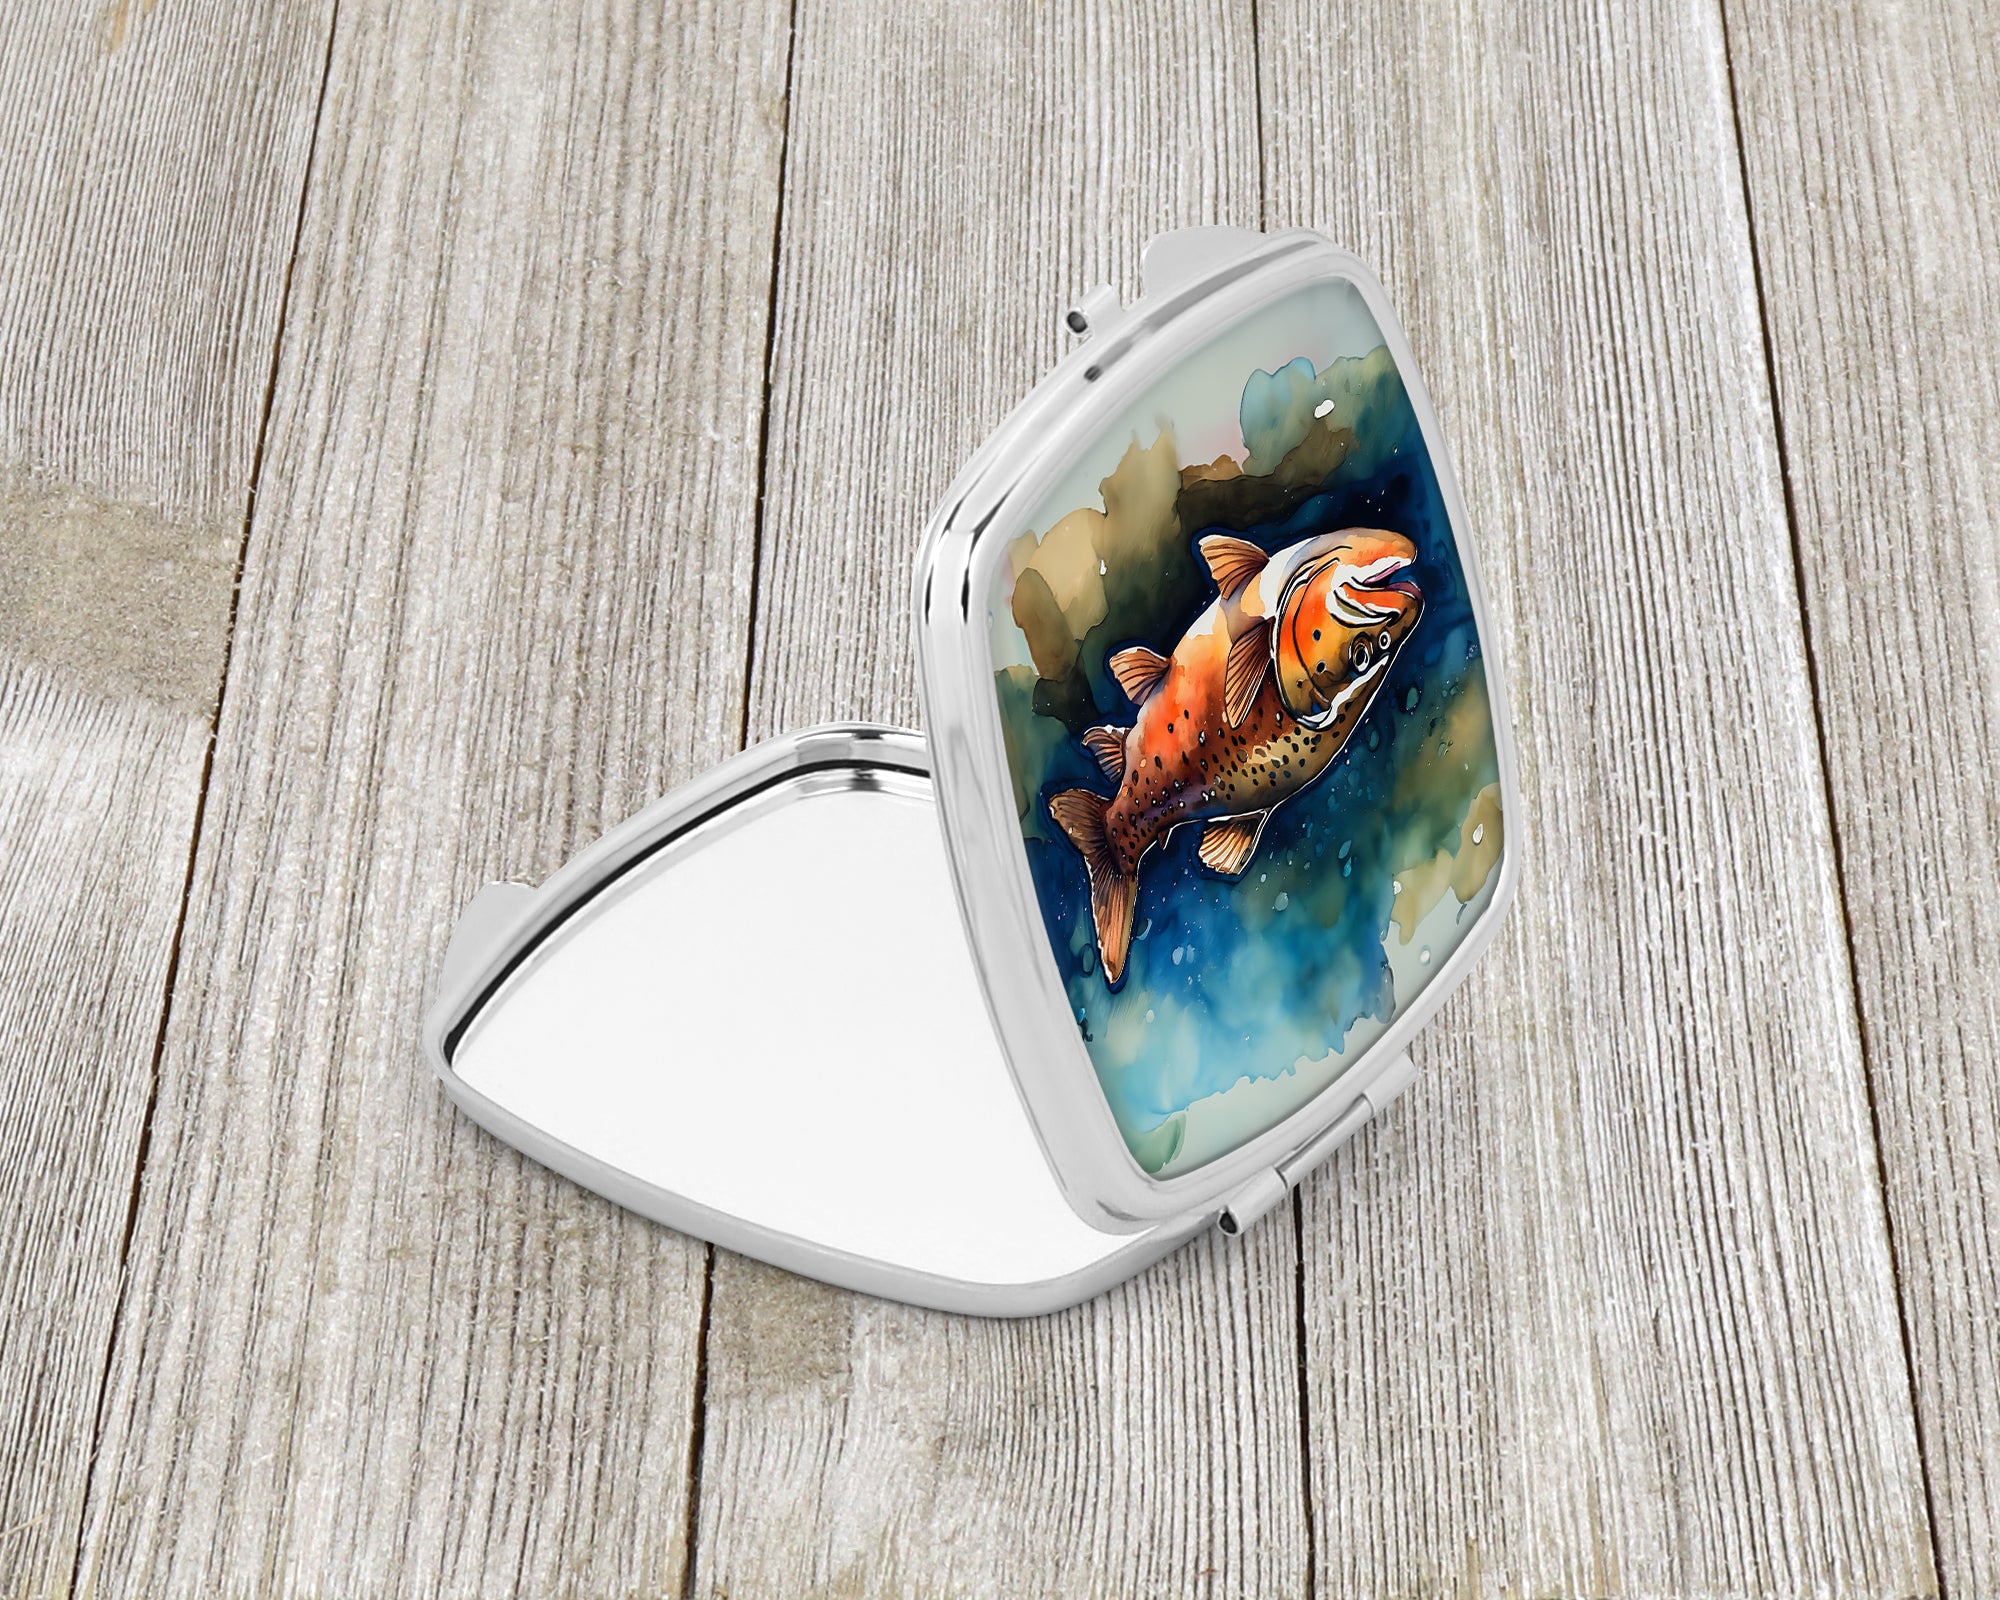 Buy this Brown Trout Compact Mirror